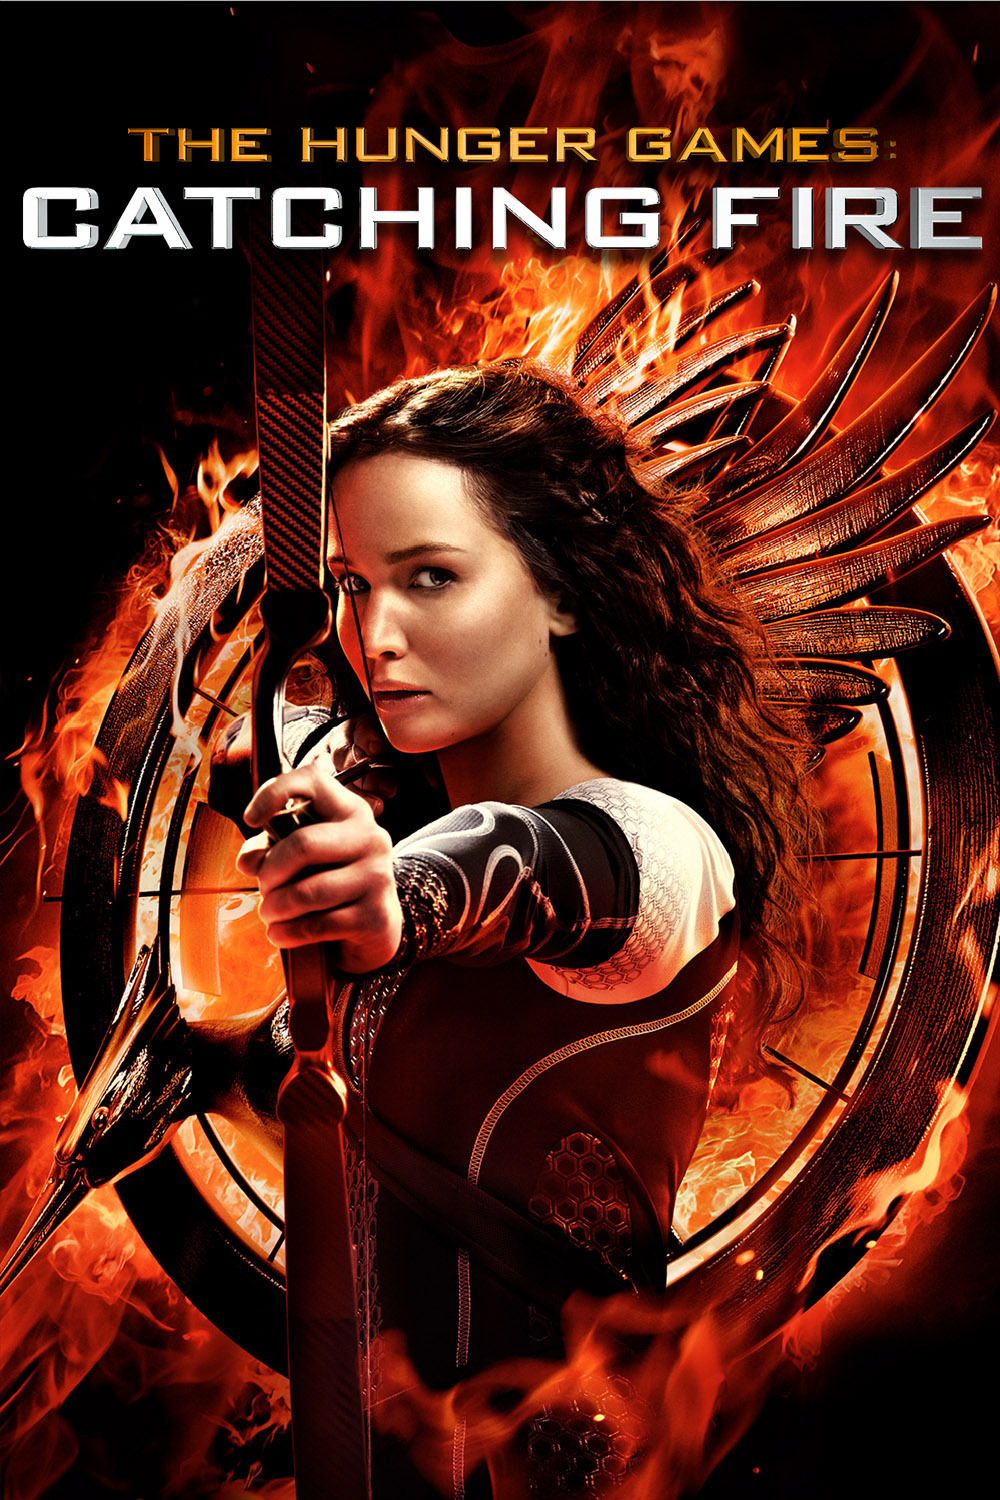 The Hunger Games – Catching Fire: I liked this one better than the first one.